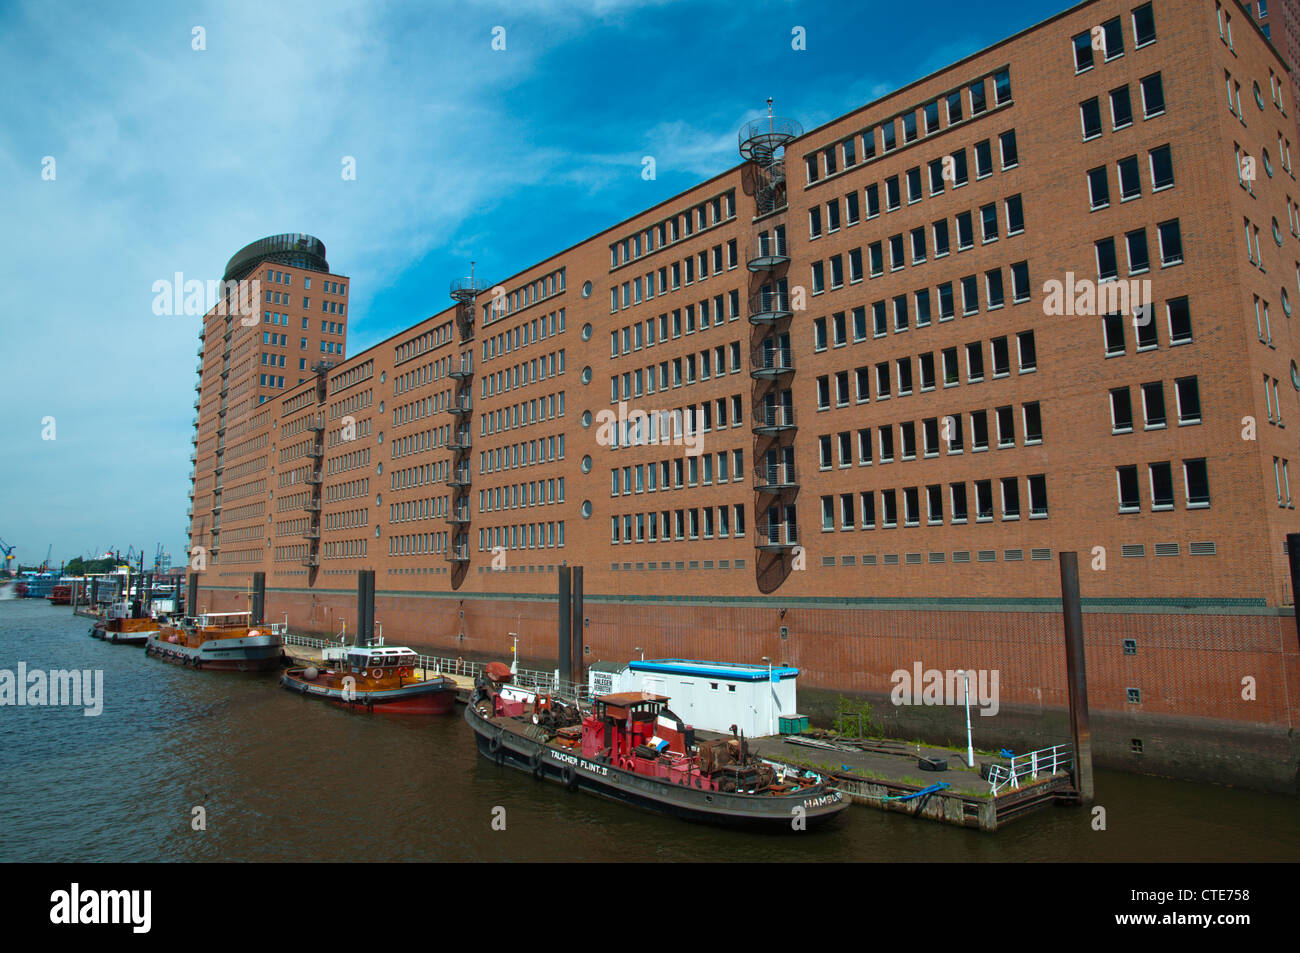 Sandtorhafen canalside buildings Warehouse district HafenCity former harbour area central Hamburg Germany Europe Stock Photo